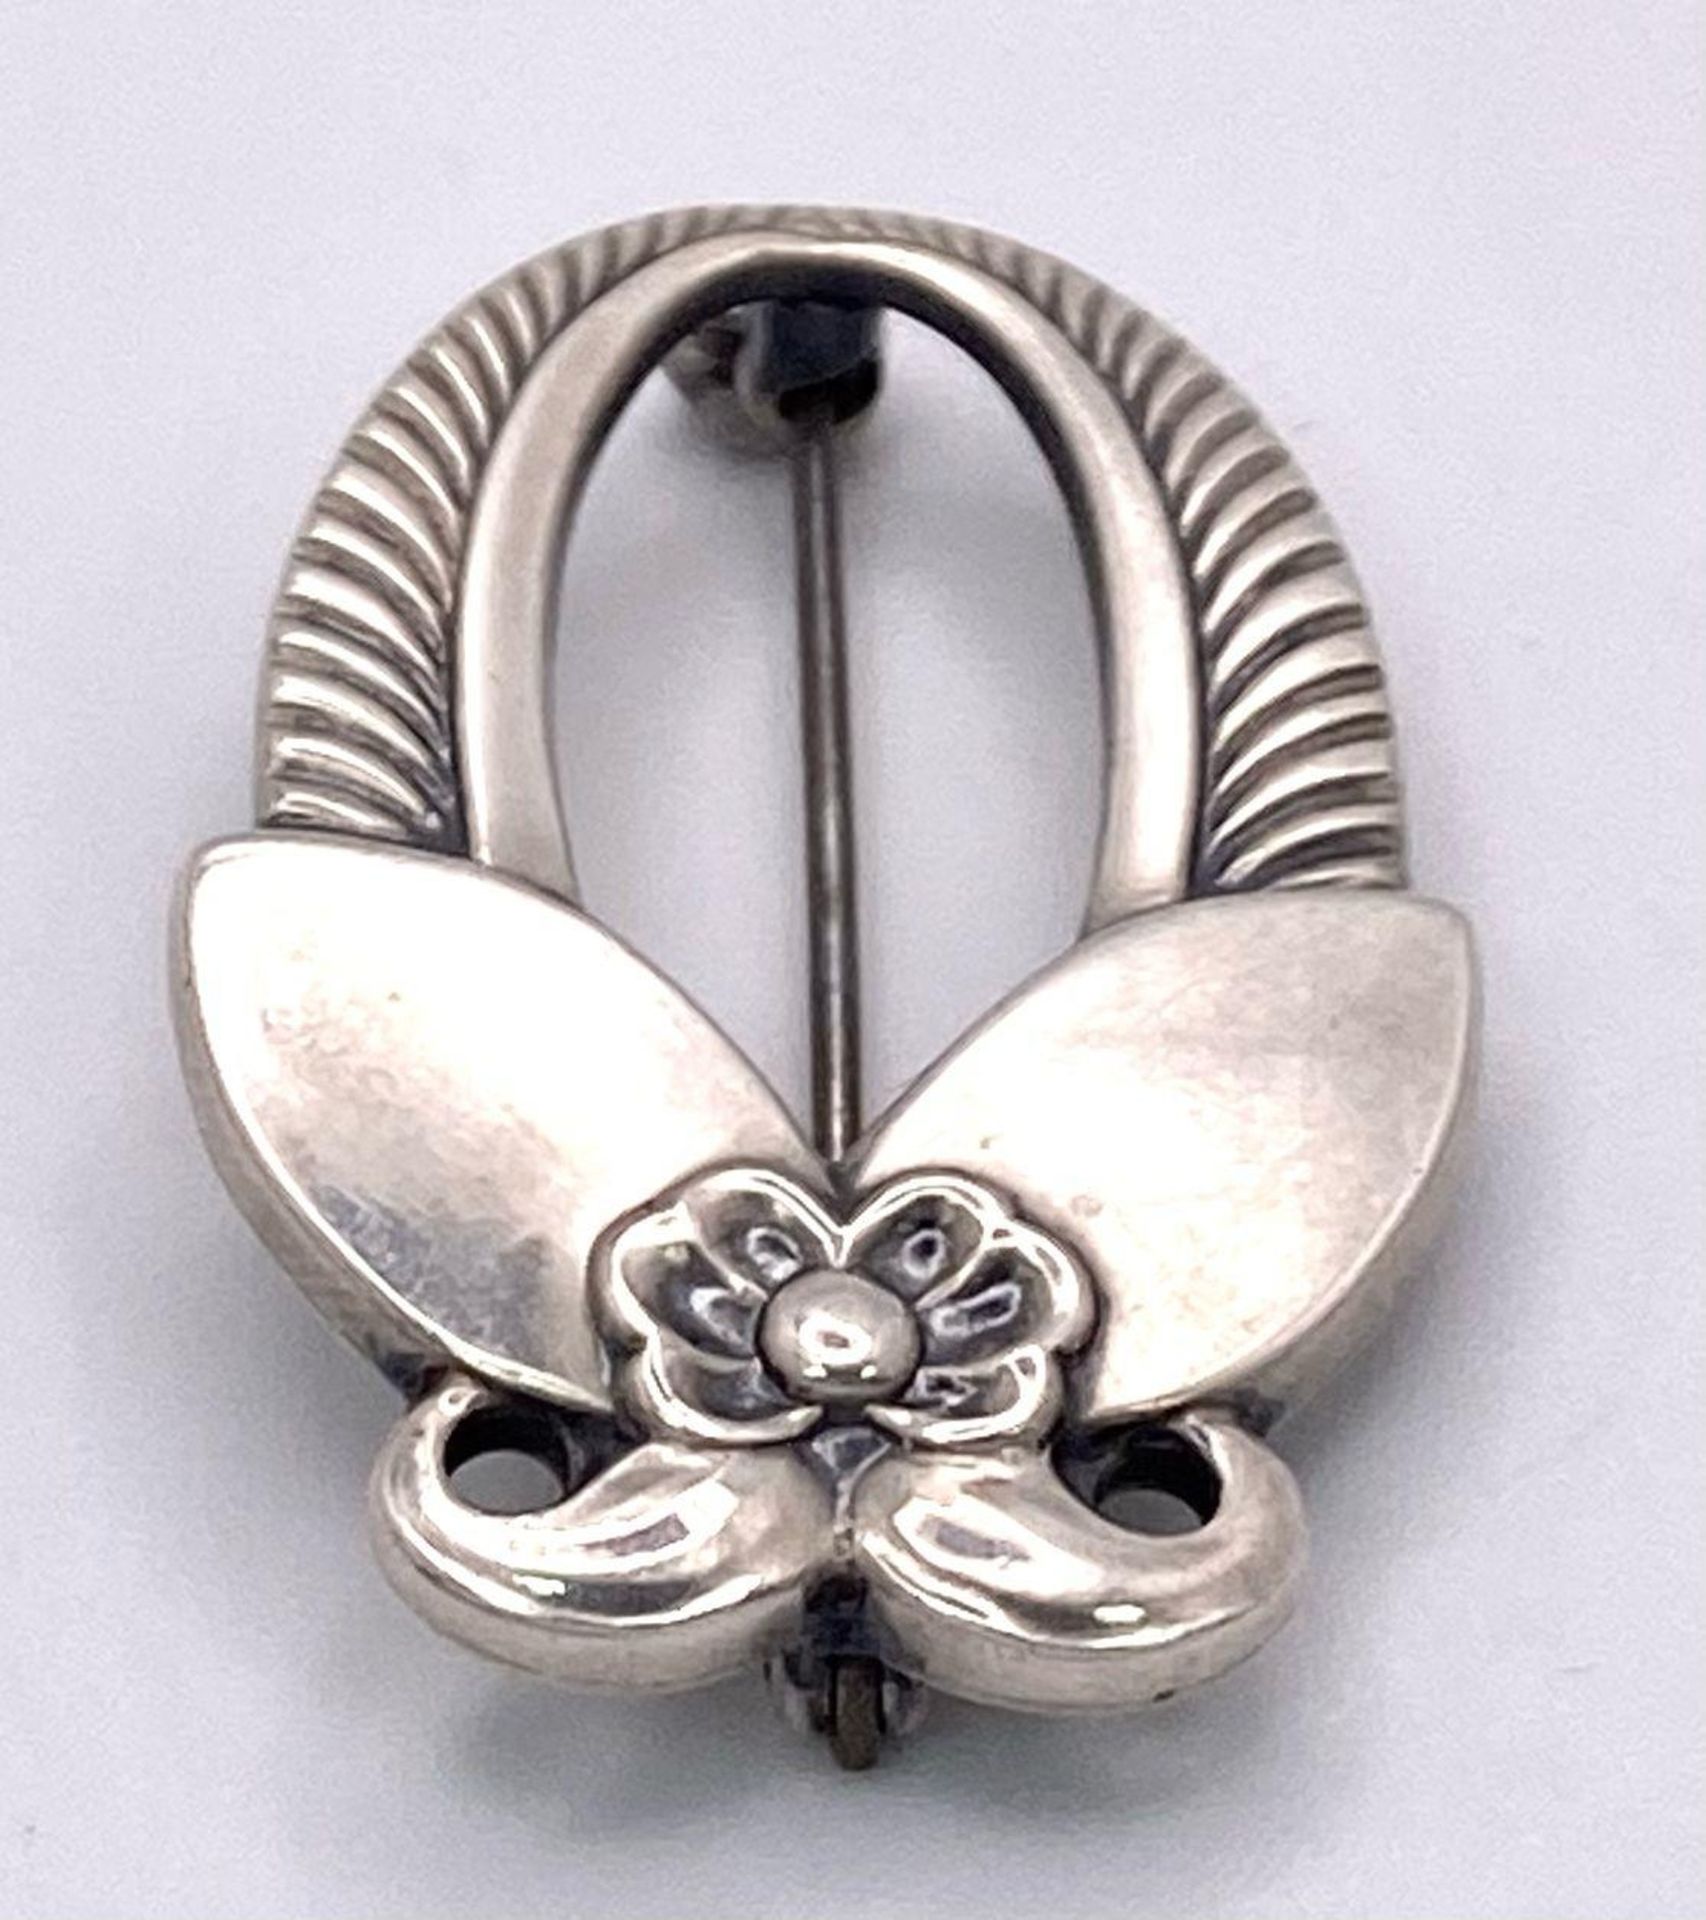 A Very Rare Vintage, Fully Marked, Georg Jensen Sterling Silver Reef Bar Brooch. Full Details